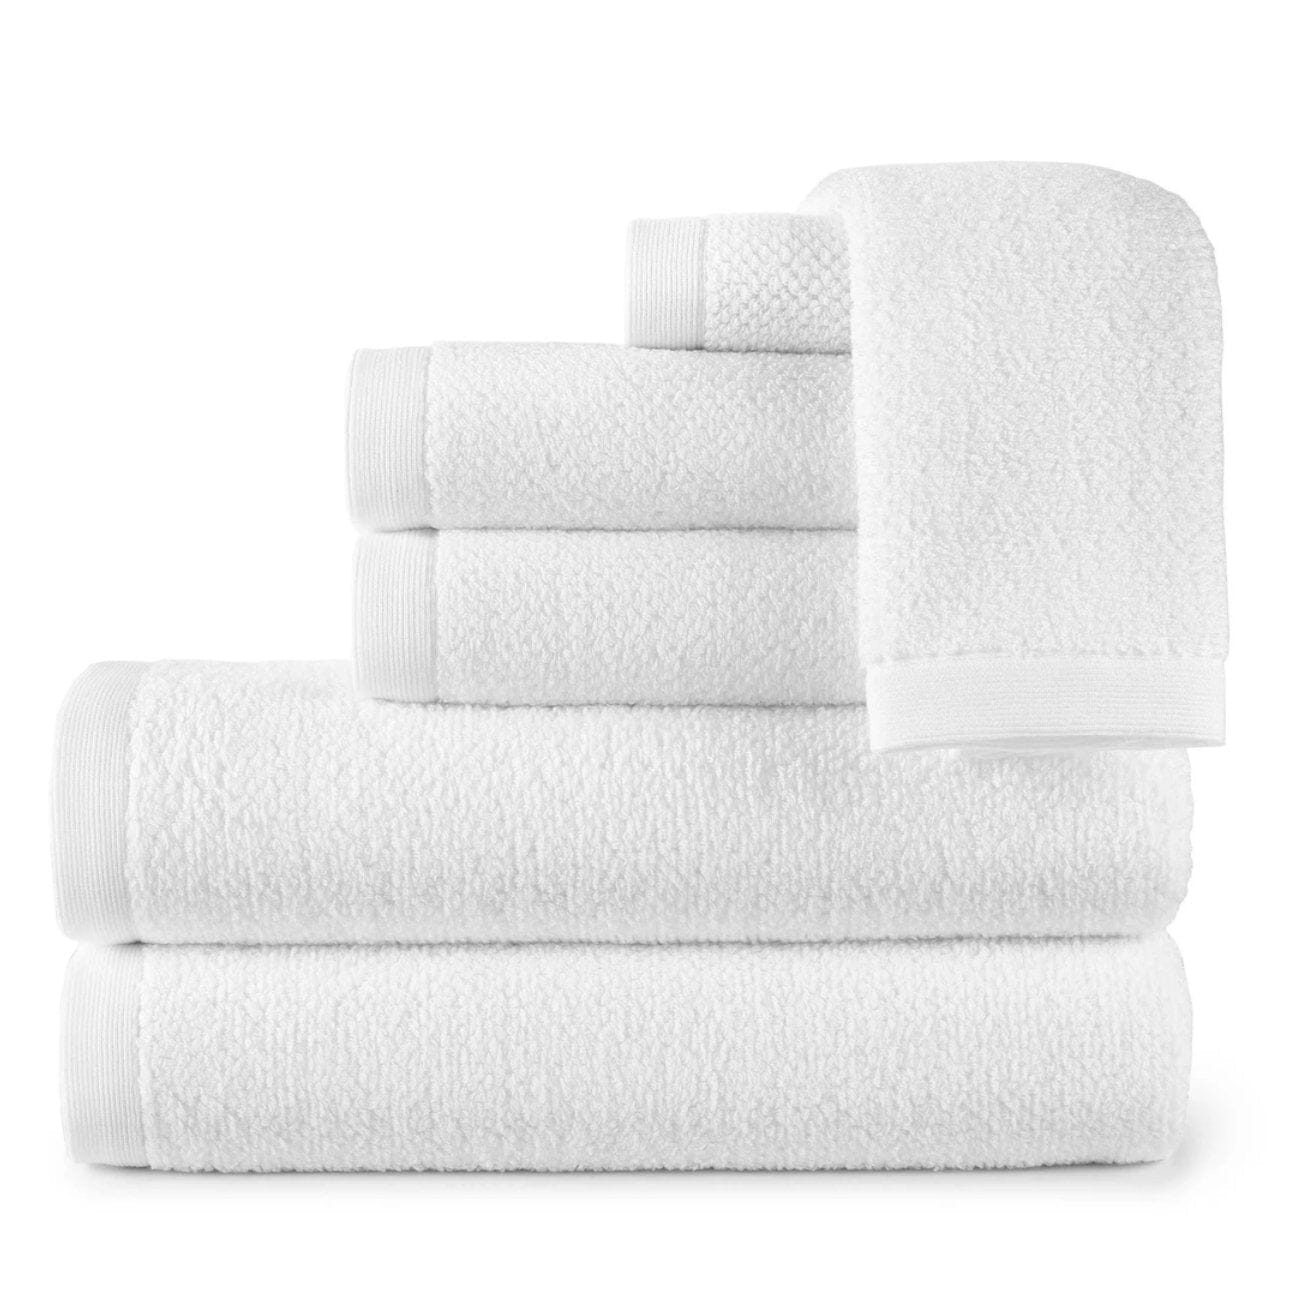 Set of Towels - Peacock Alley Jubilee White Color Towels at Fig Linens and Home